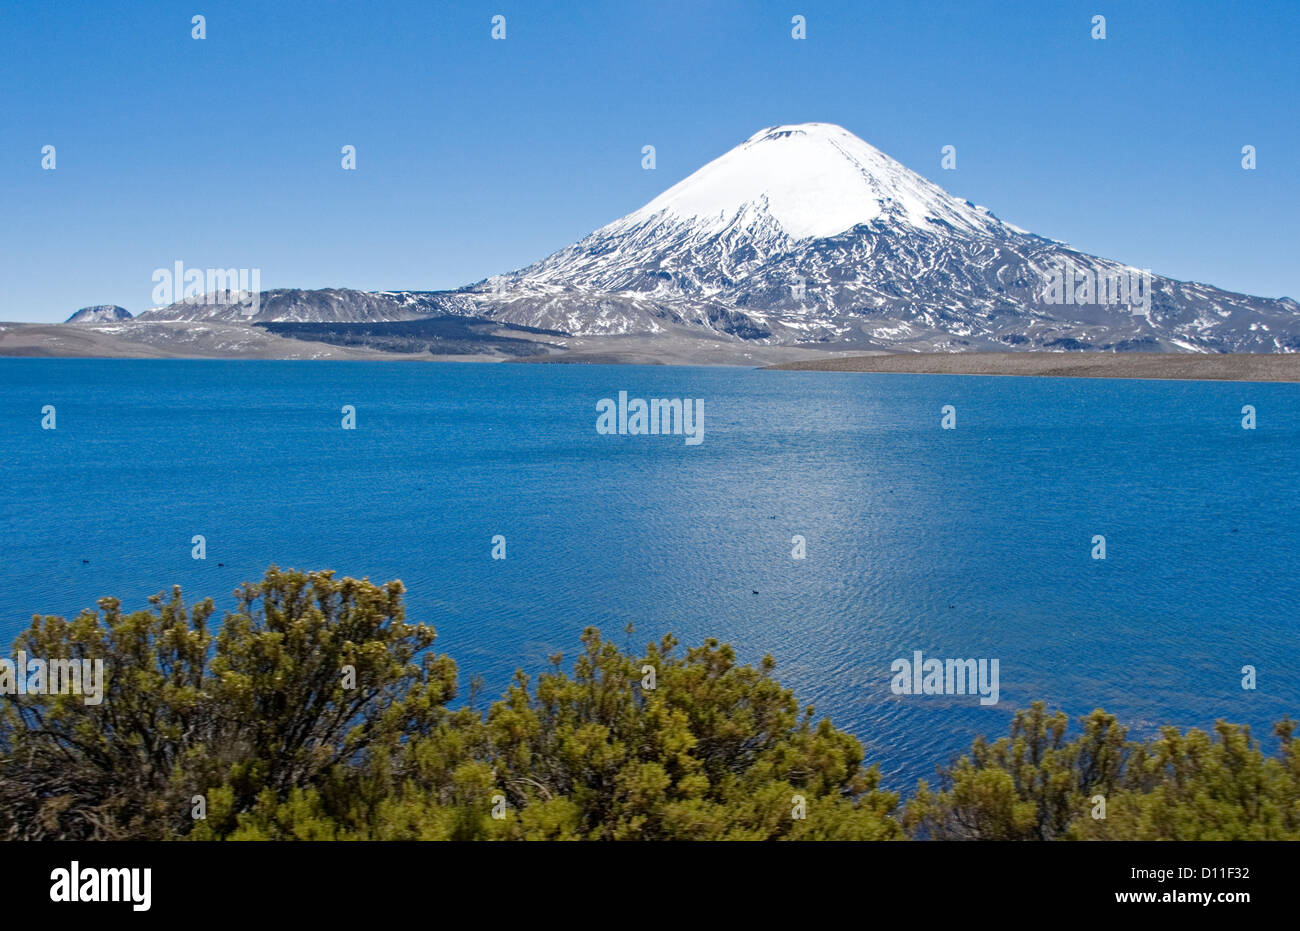 Mountain landscape with snow capped volcano Parinacota rising high above calm blue waters of Lake Chungara in northern Chile Stock Photo